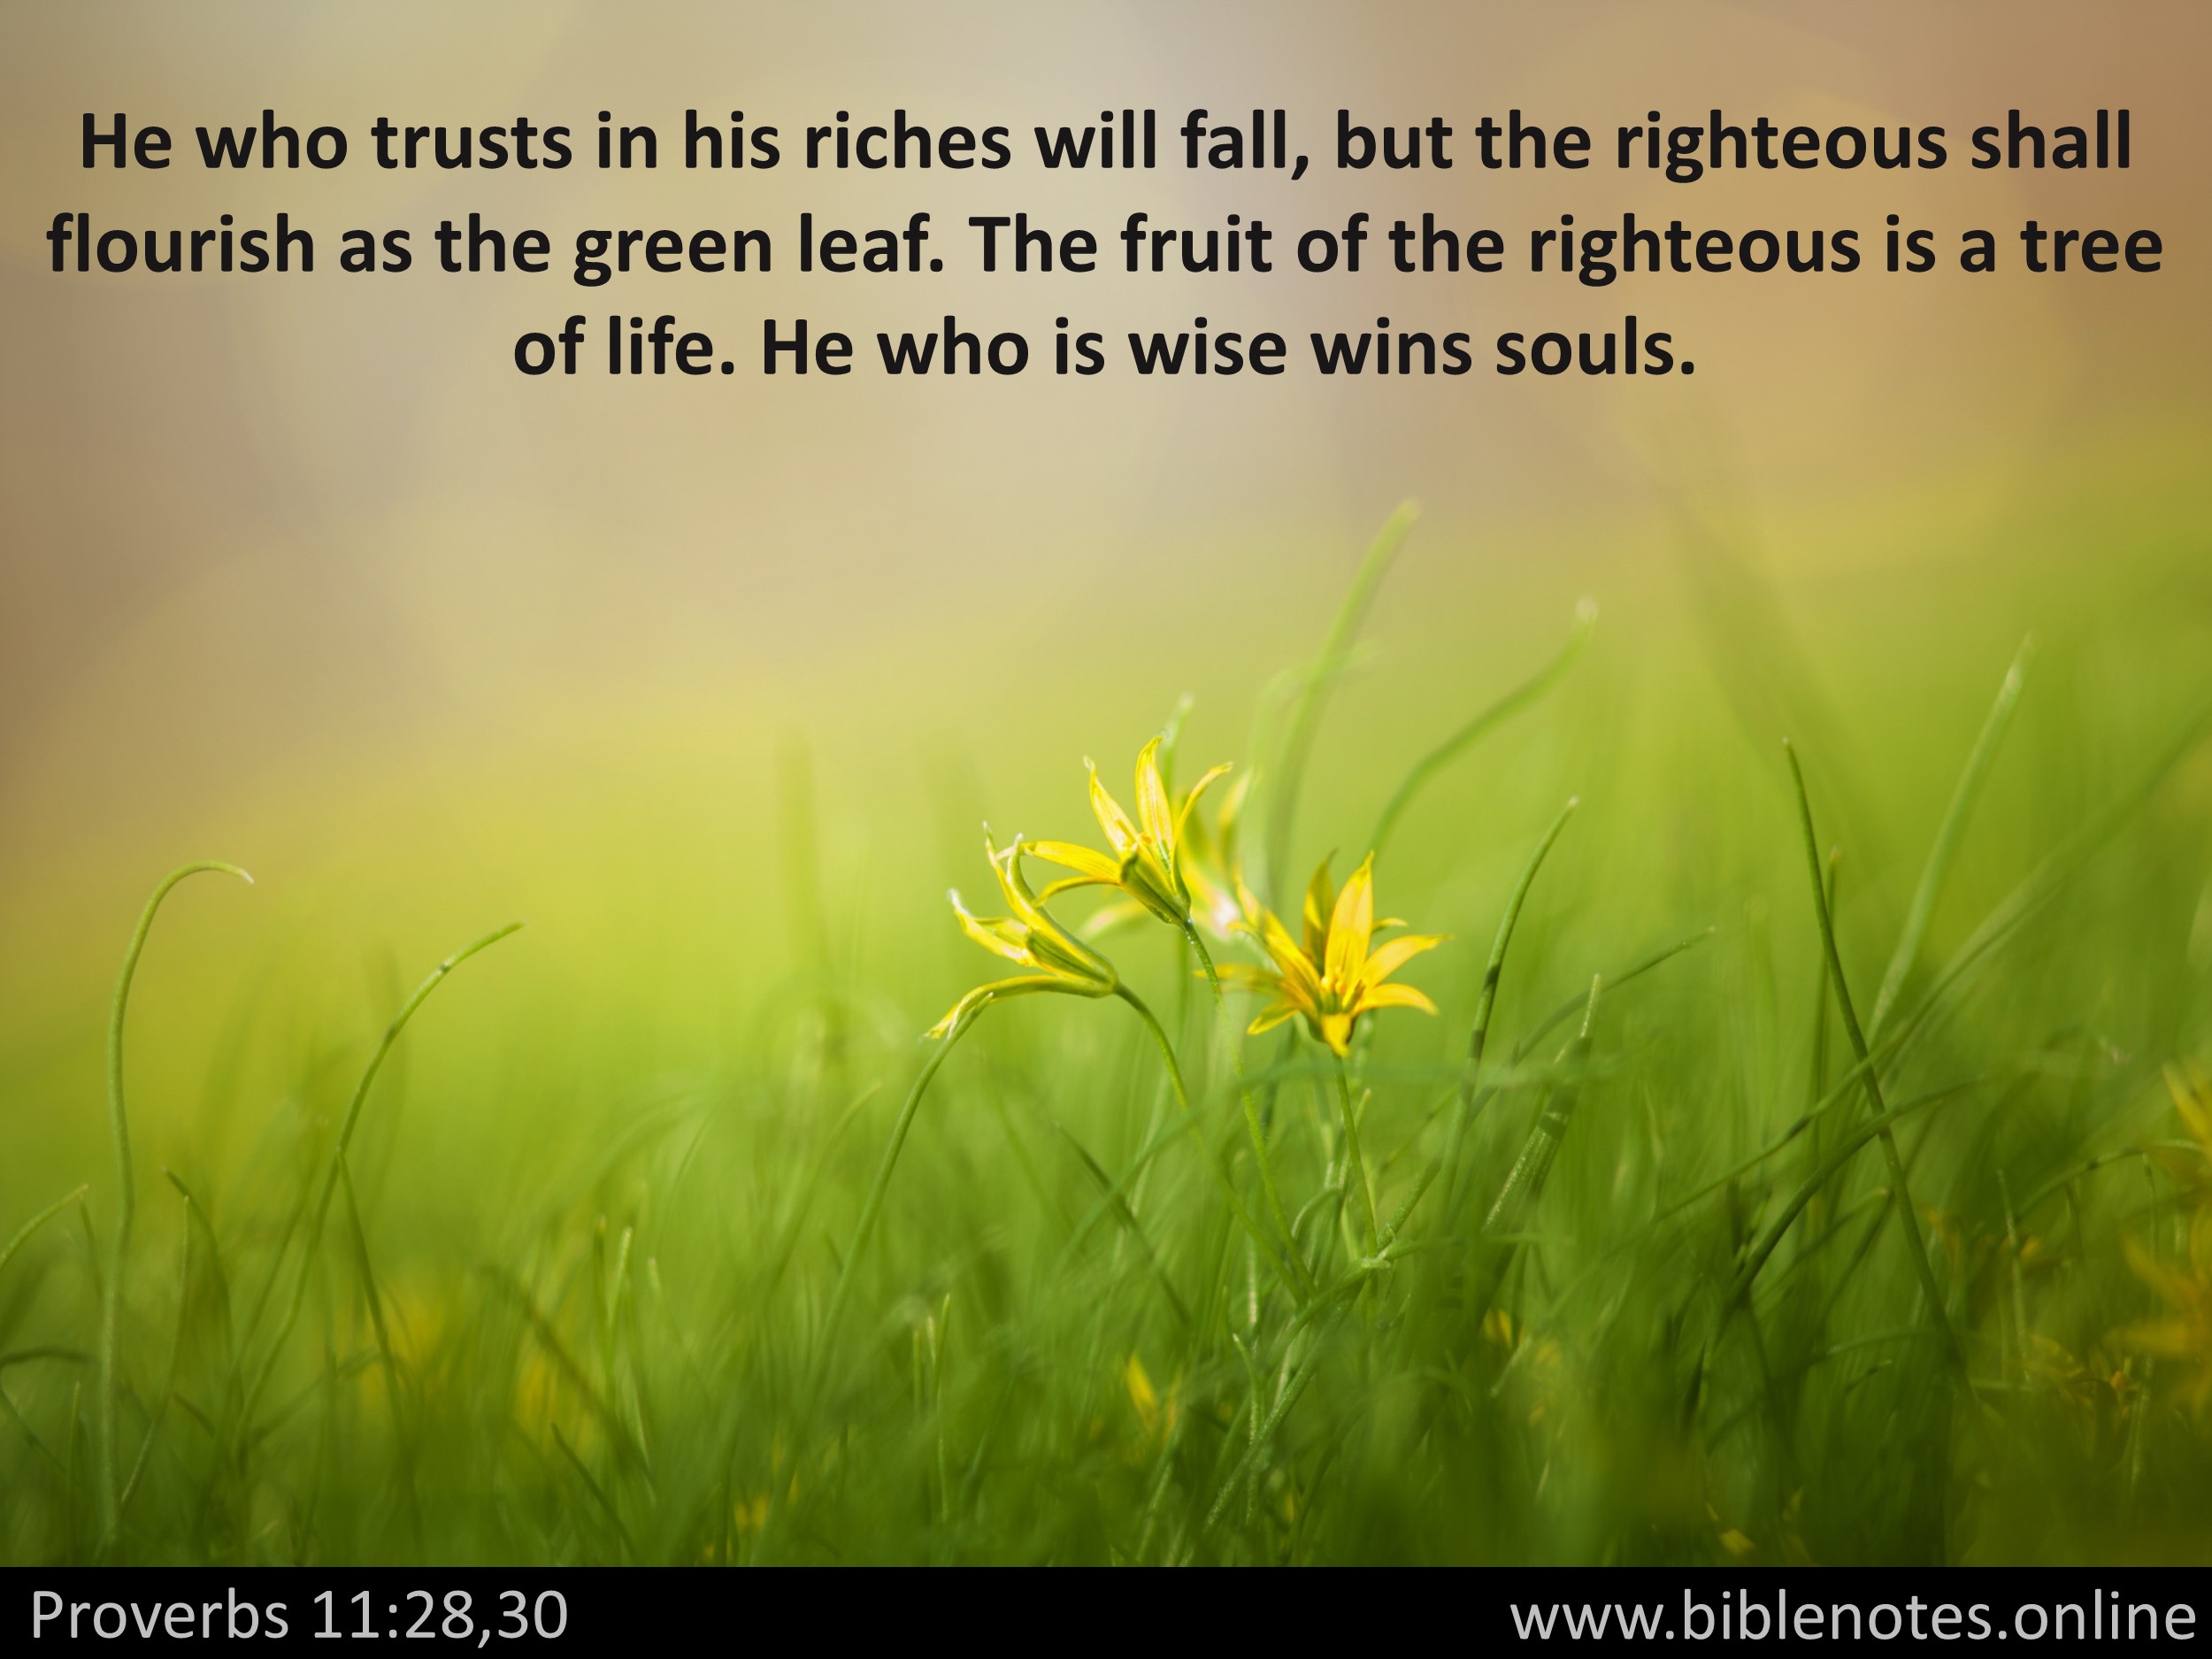 Bible Verse from Proverbs Chapter 11